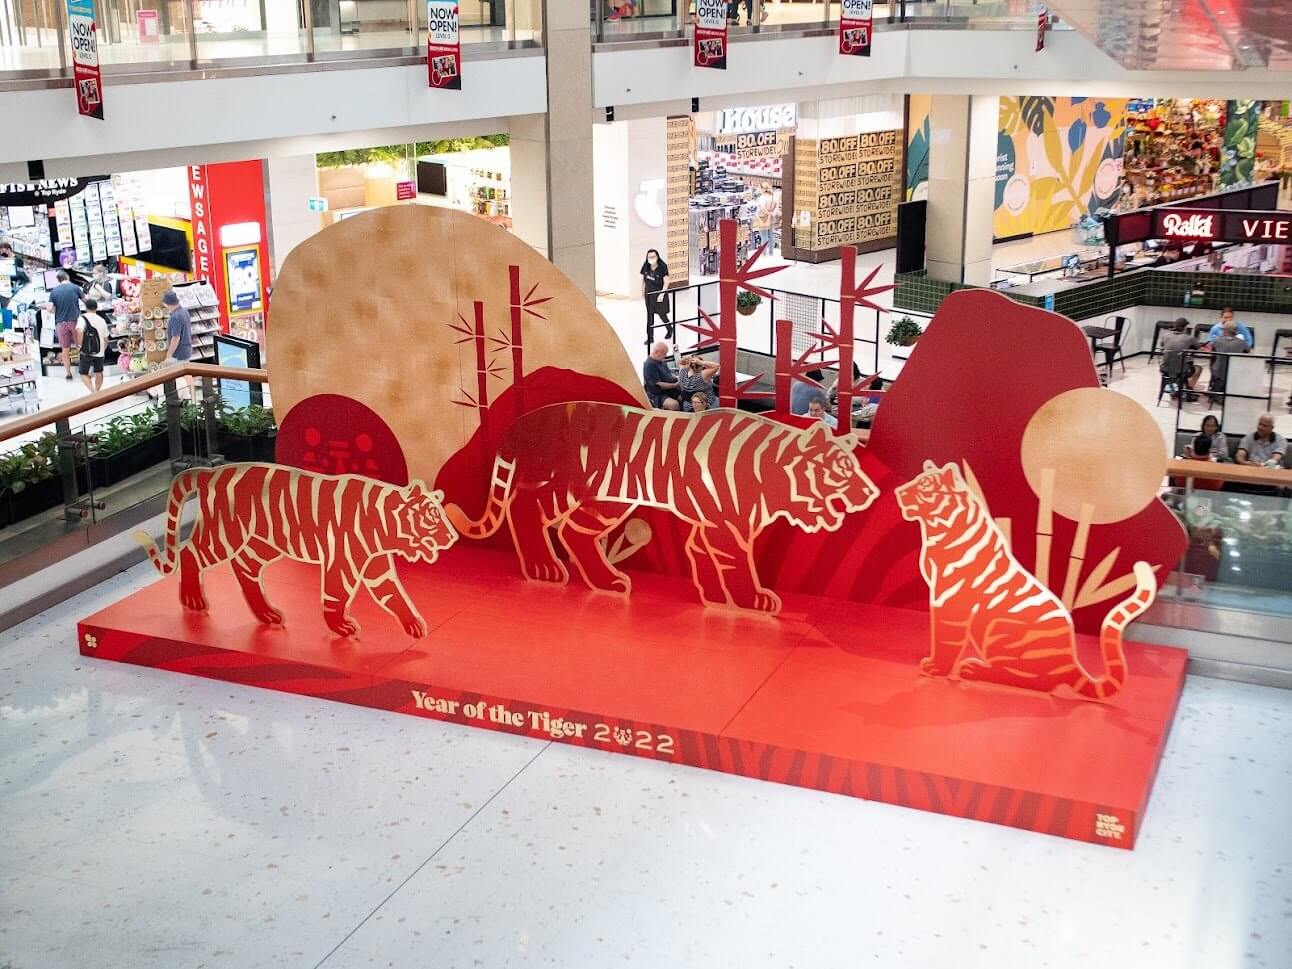 Large gold and red tiger display made from Re-Board.